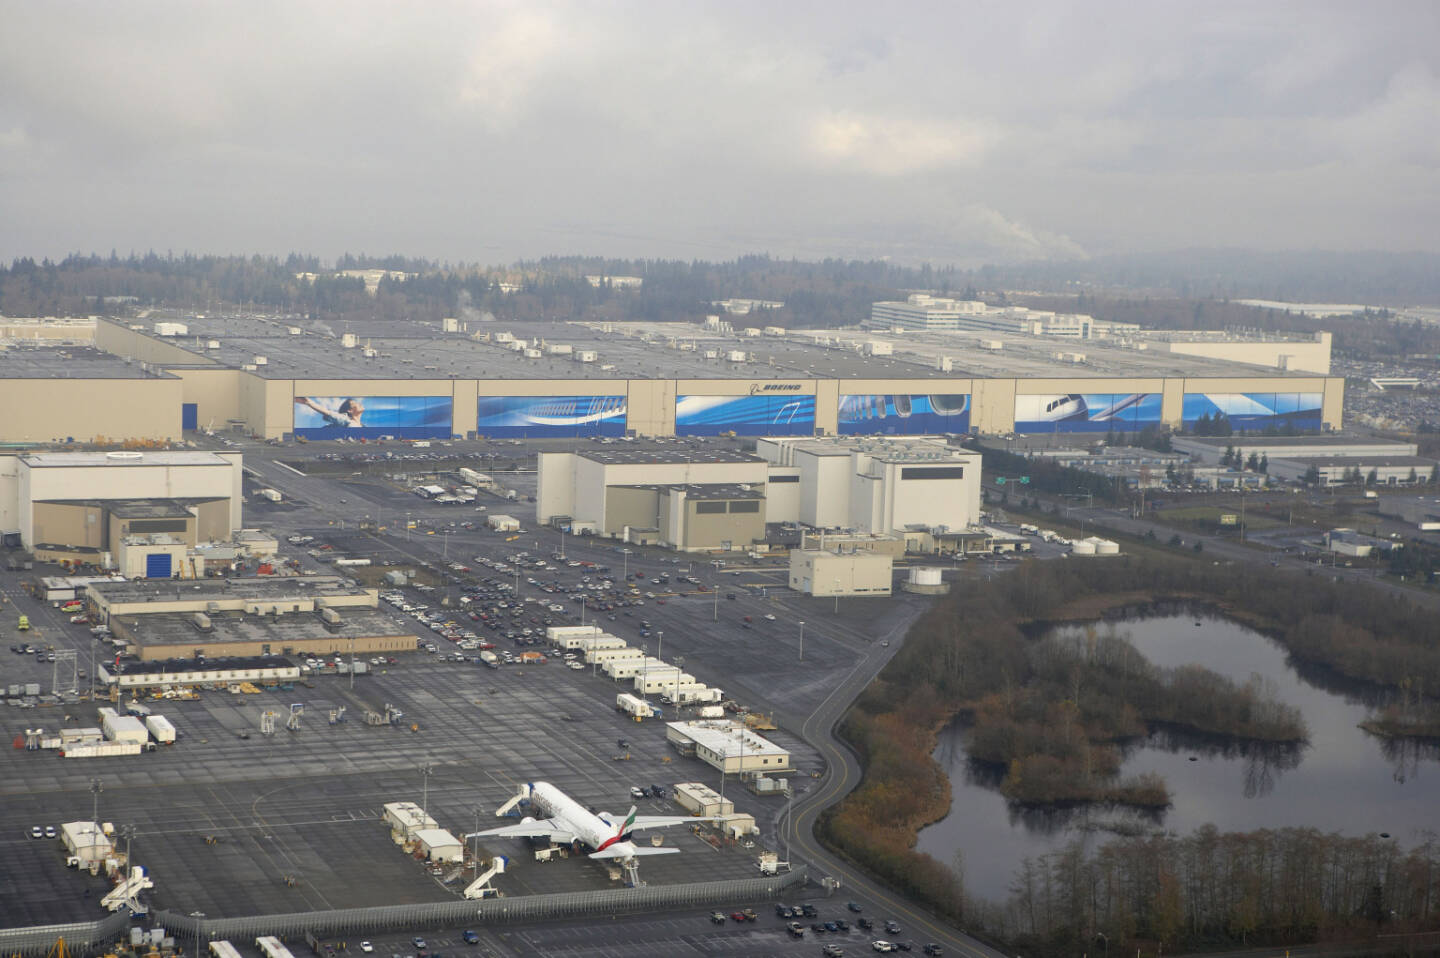 Boeing's largest site located in Everett, Wash, factory, Boeing Company